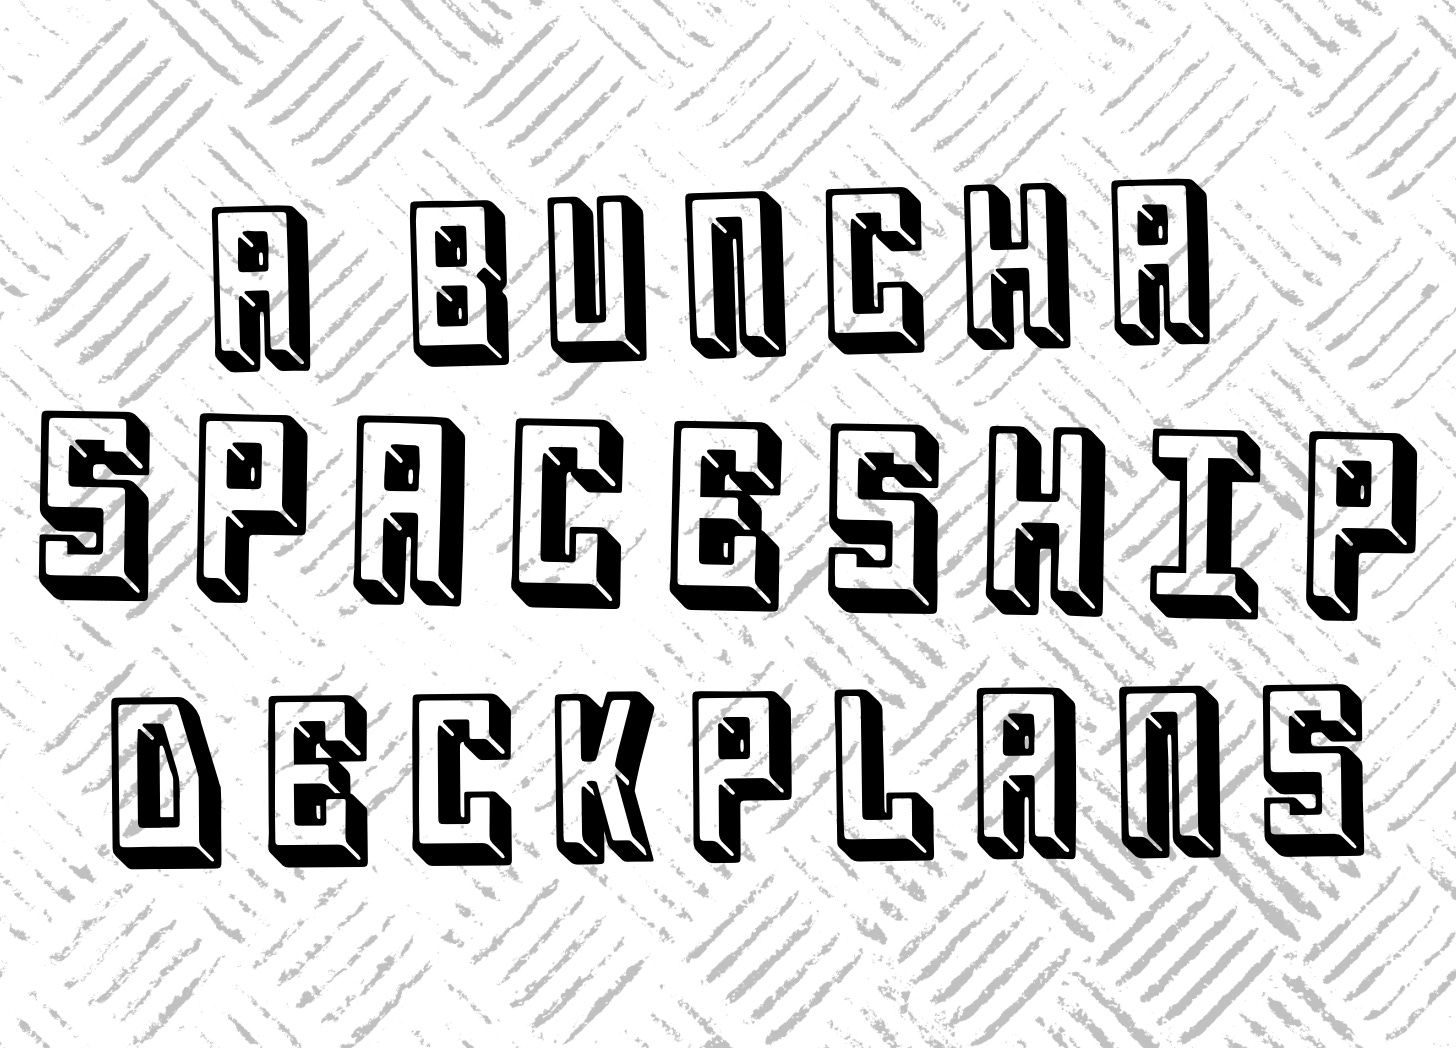 Steel background, reads: A bunch of space ship deck plans.